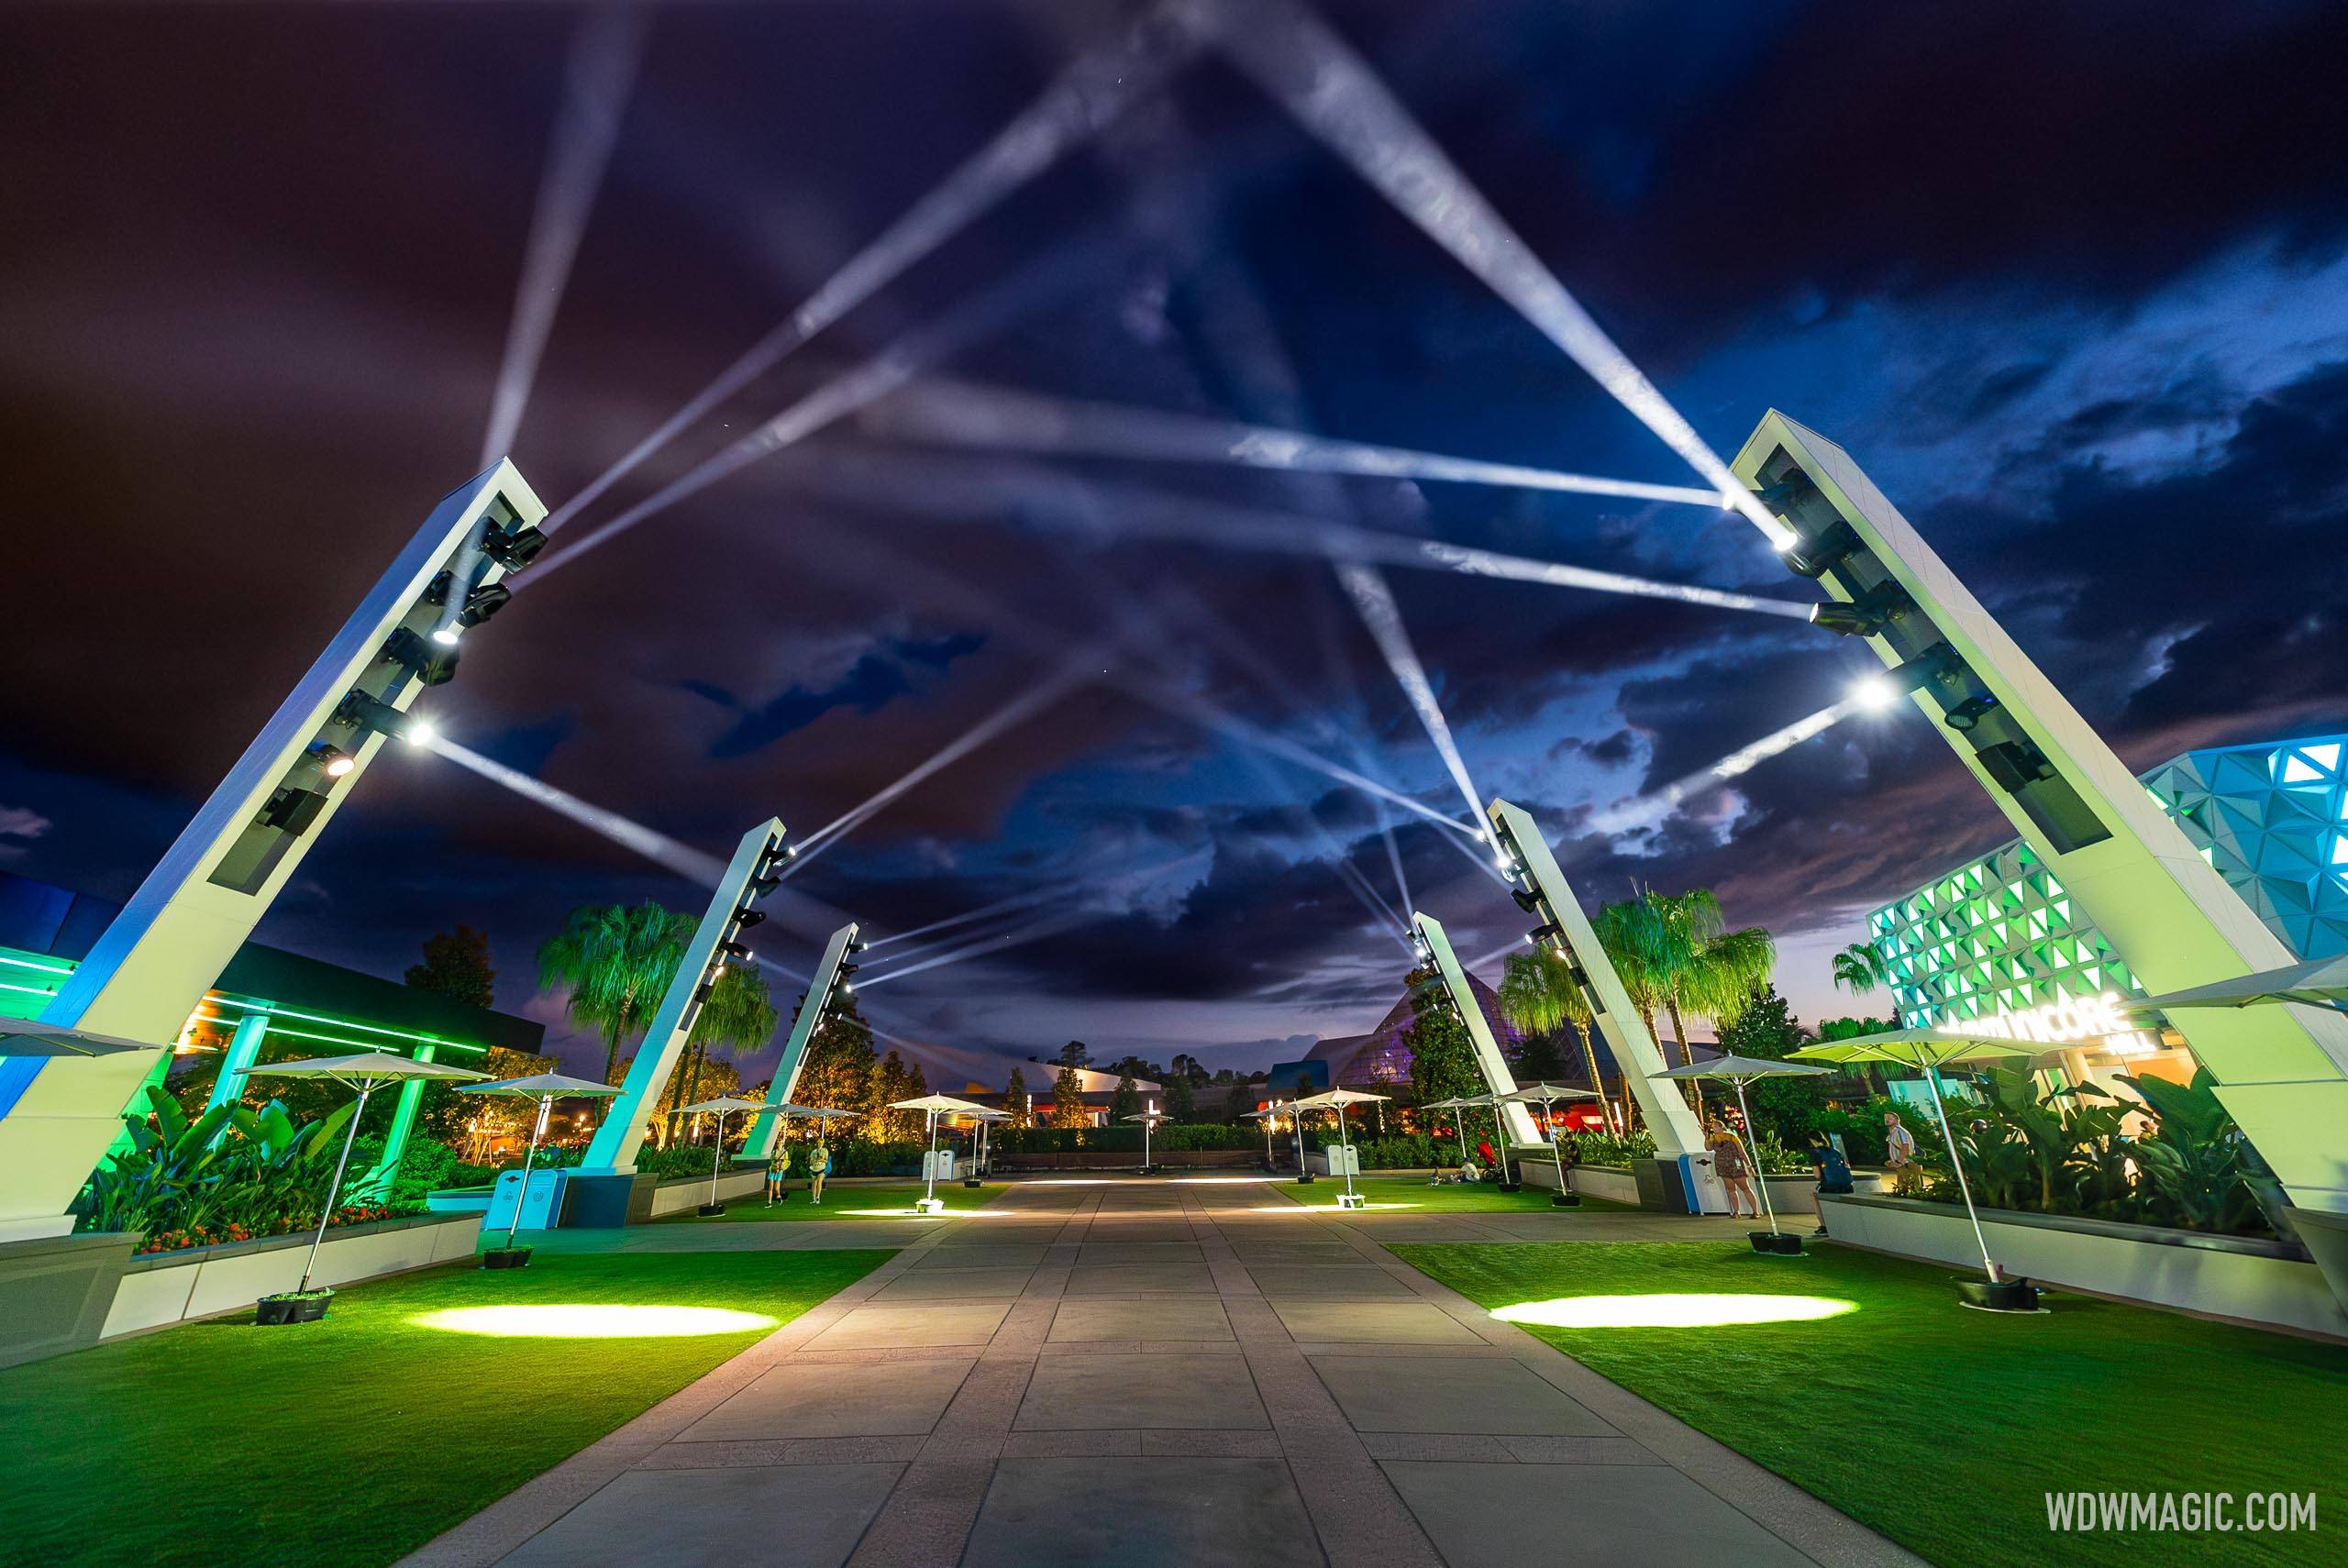 A Look at the New Lighting Design at EPCOT's CommuniCore Hall and Plaza